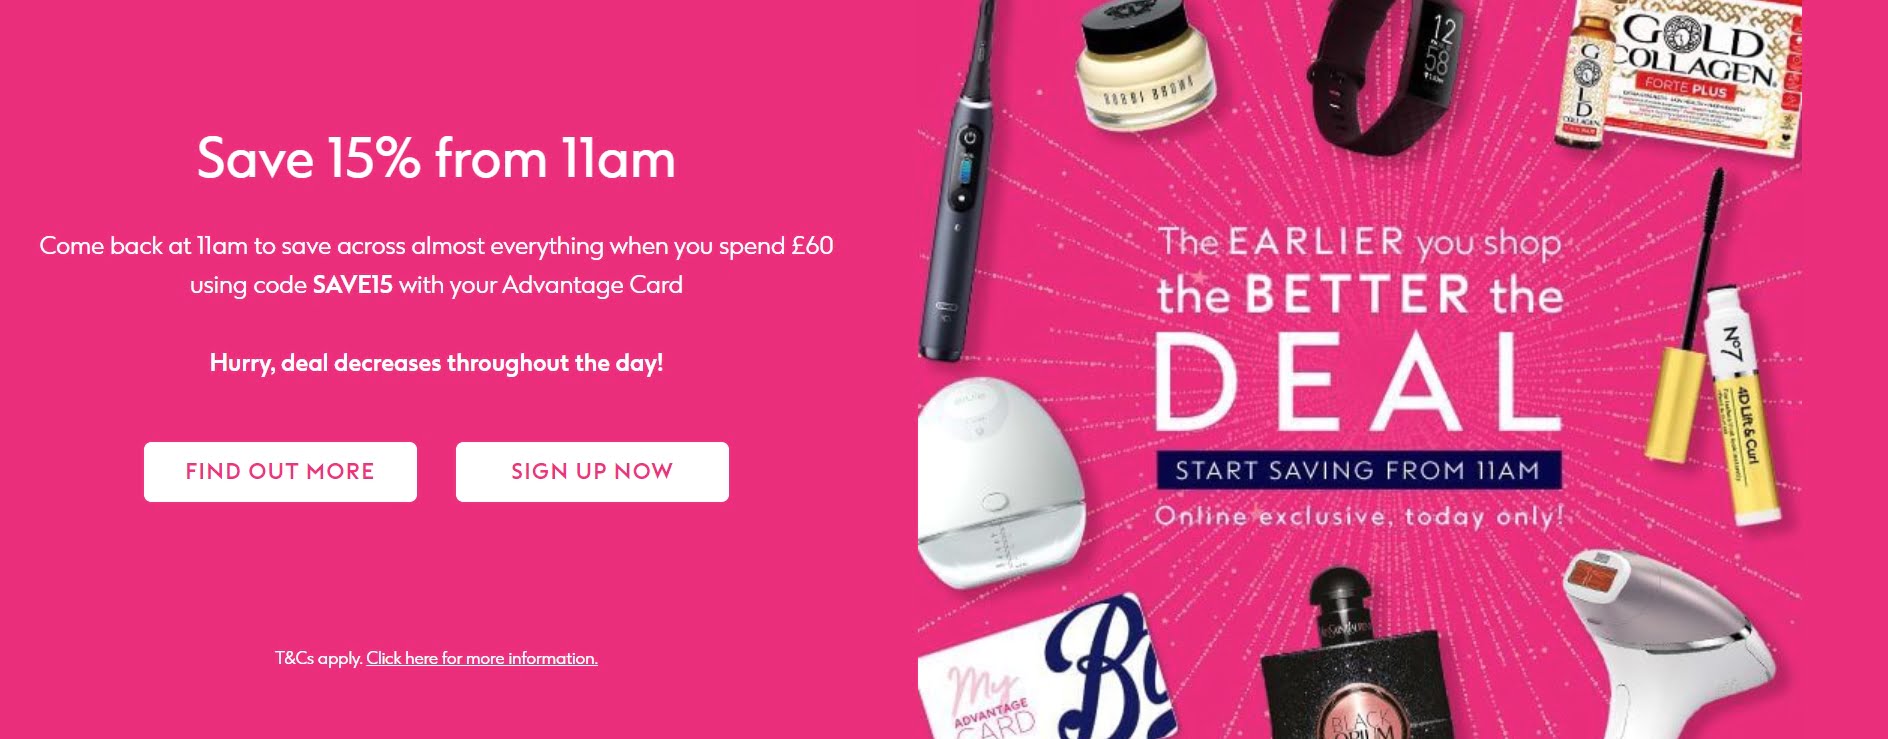 Up to 15% on almost everything at Boots